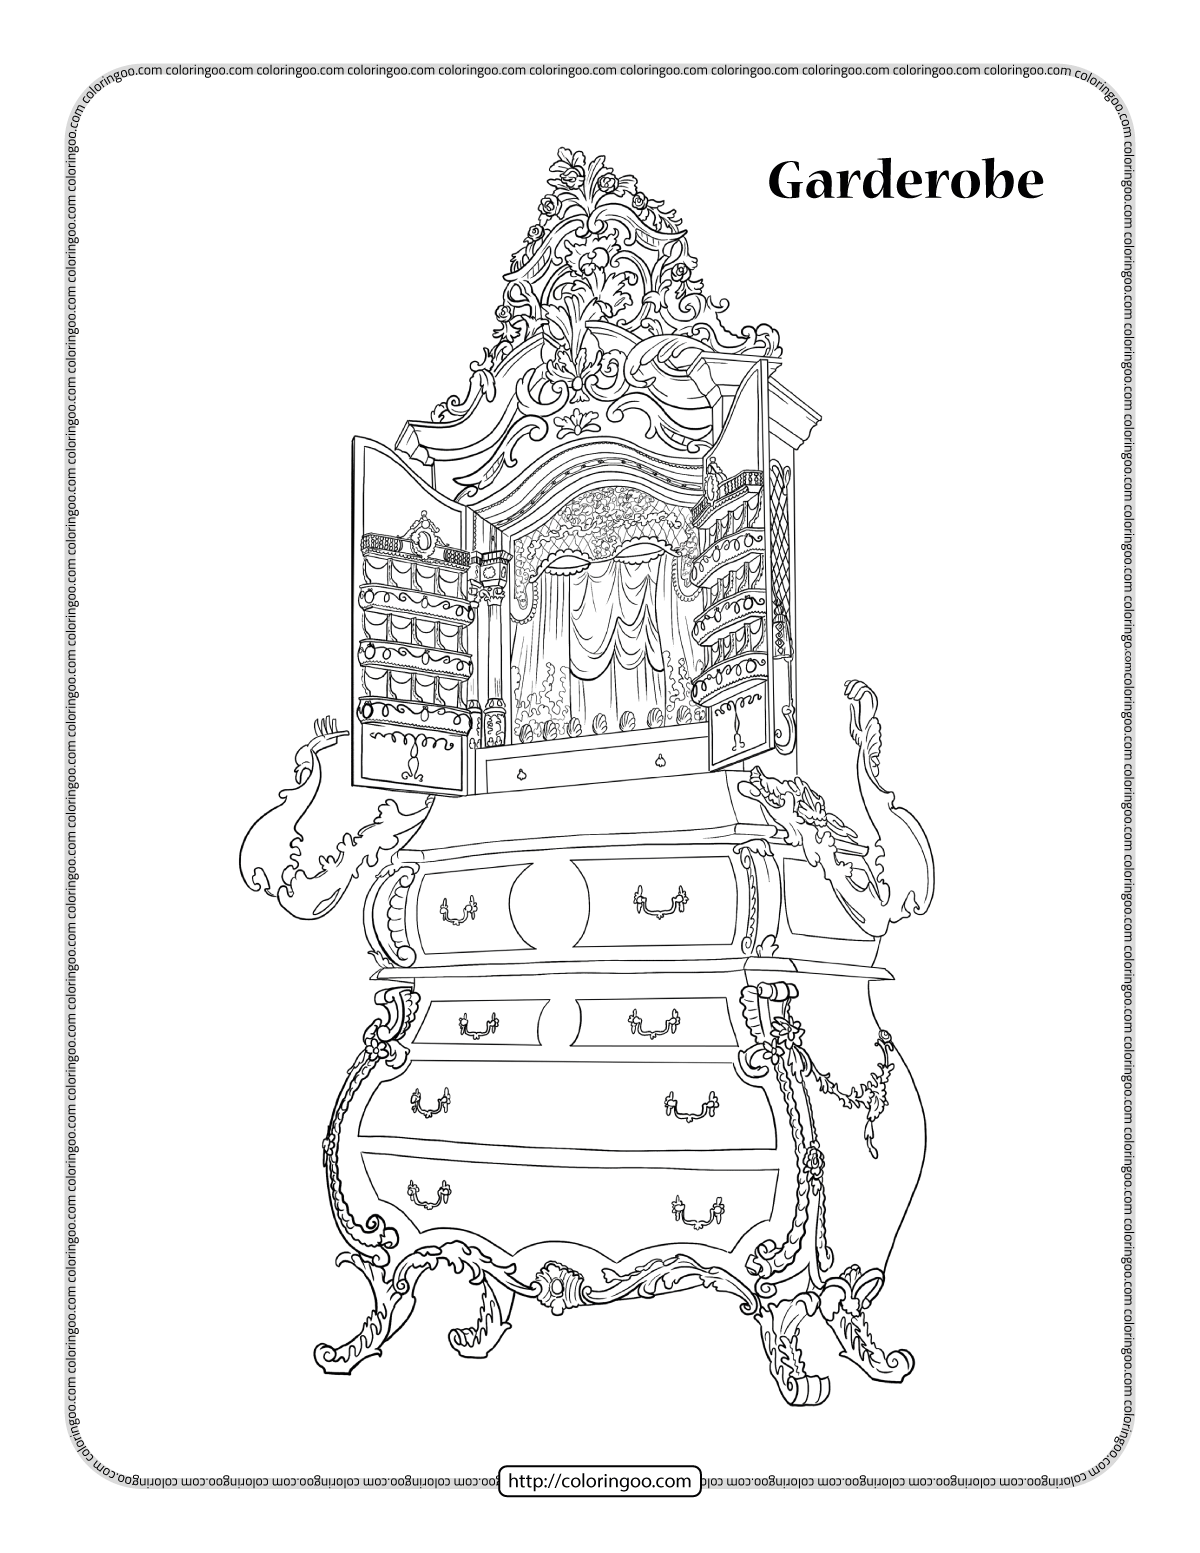 beauty and the beast garderobe coloring page